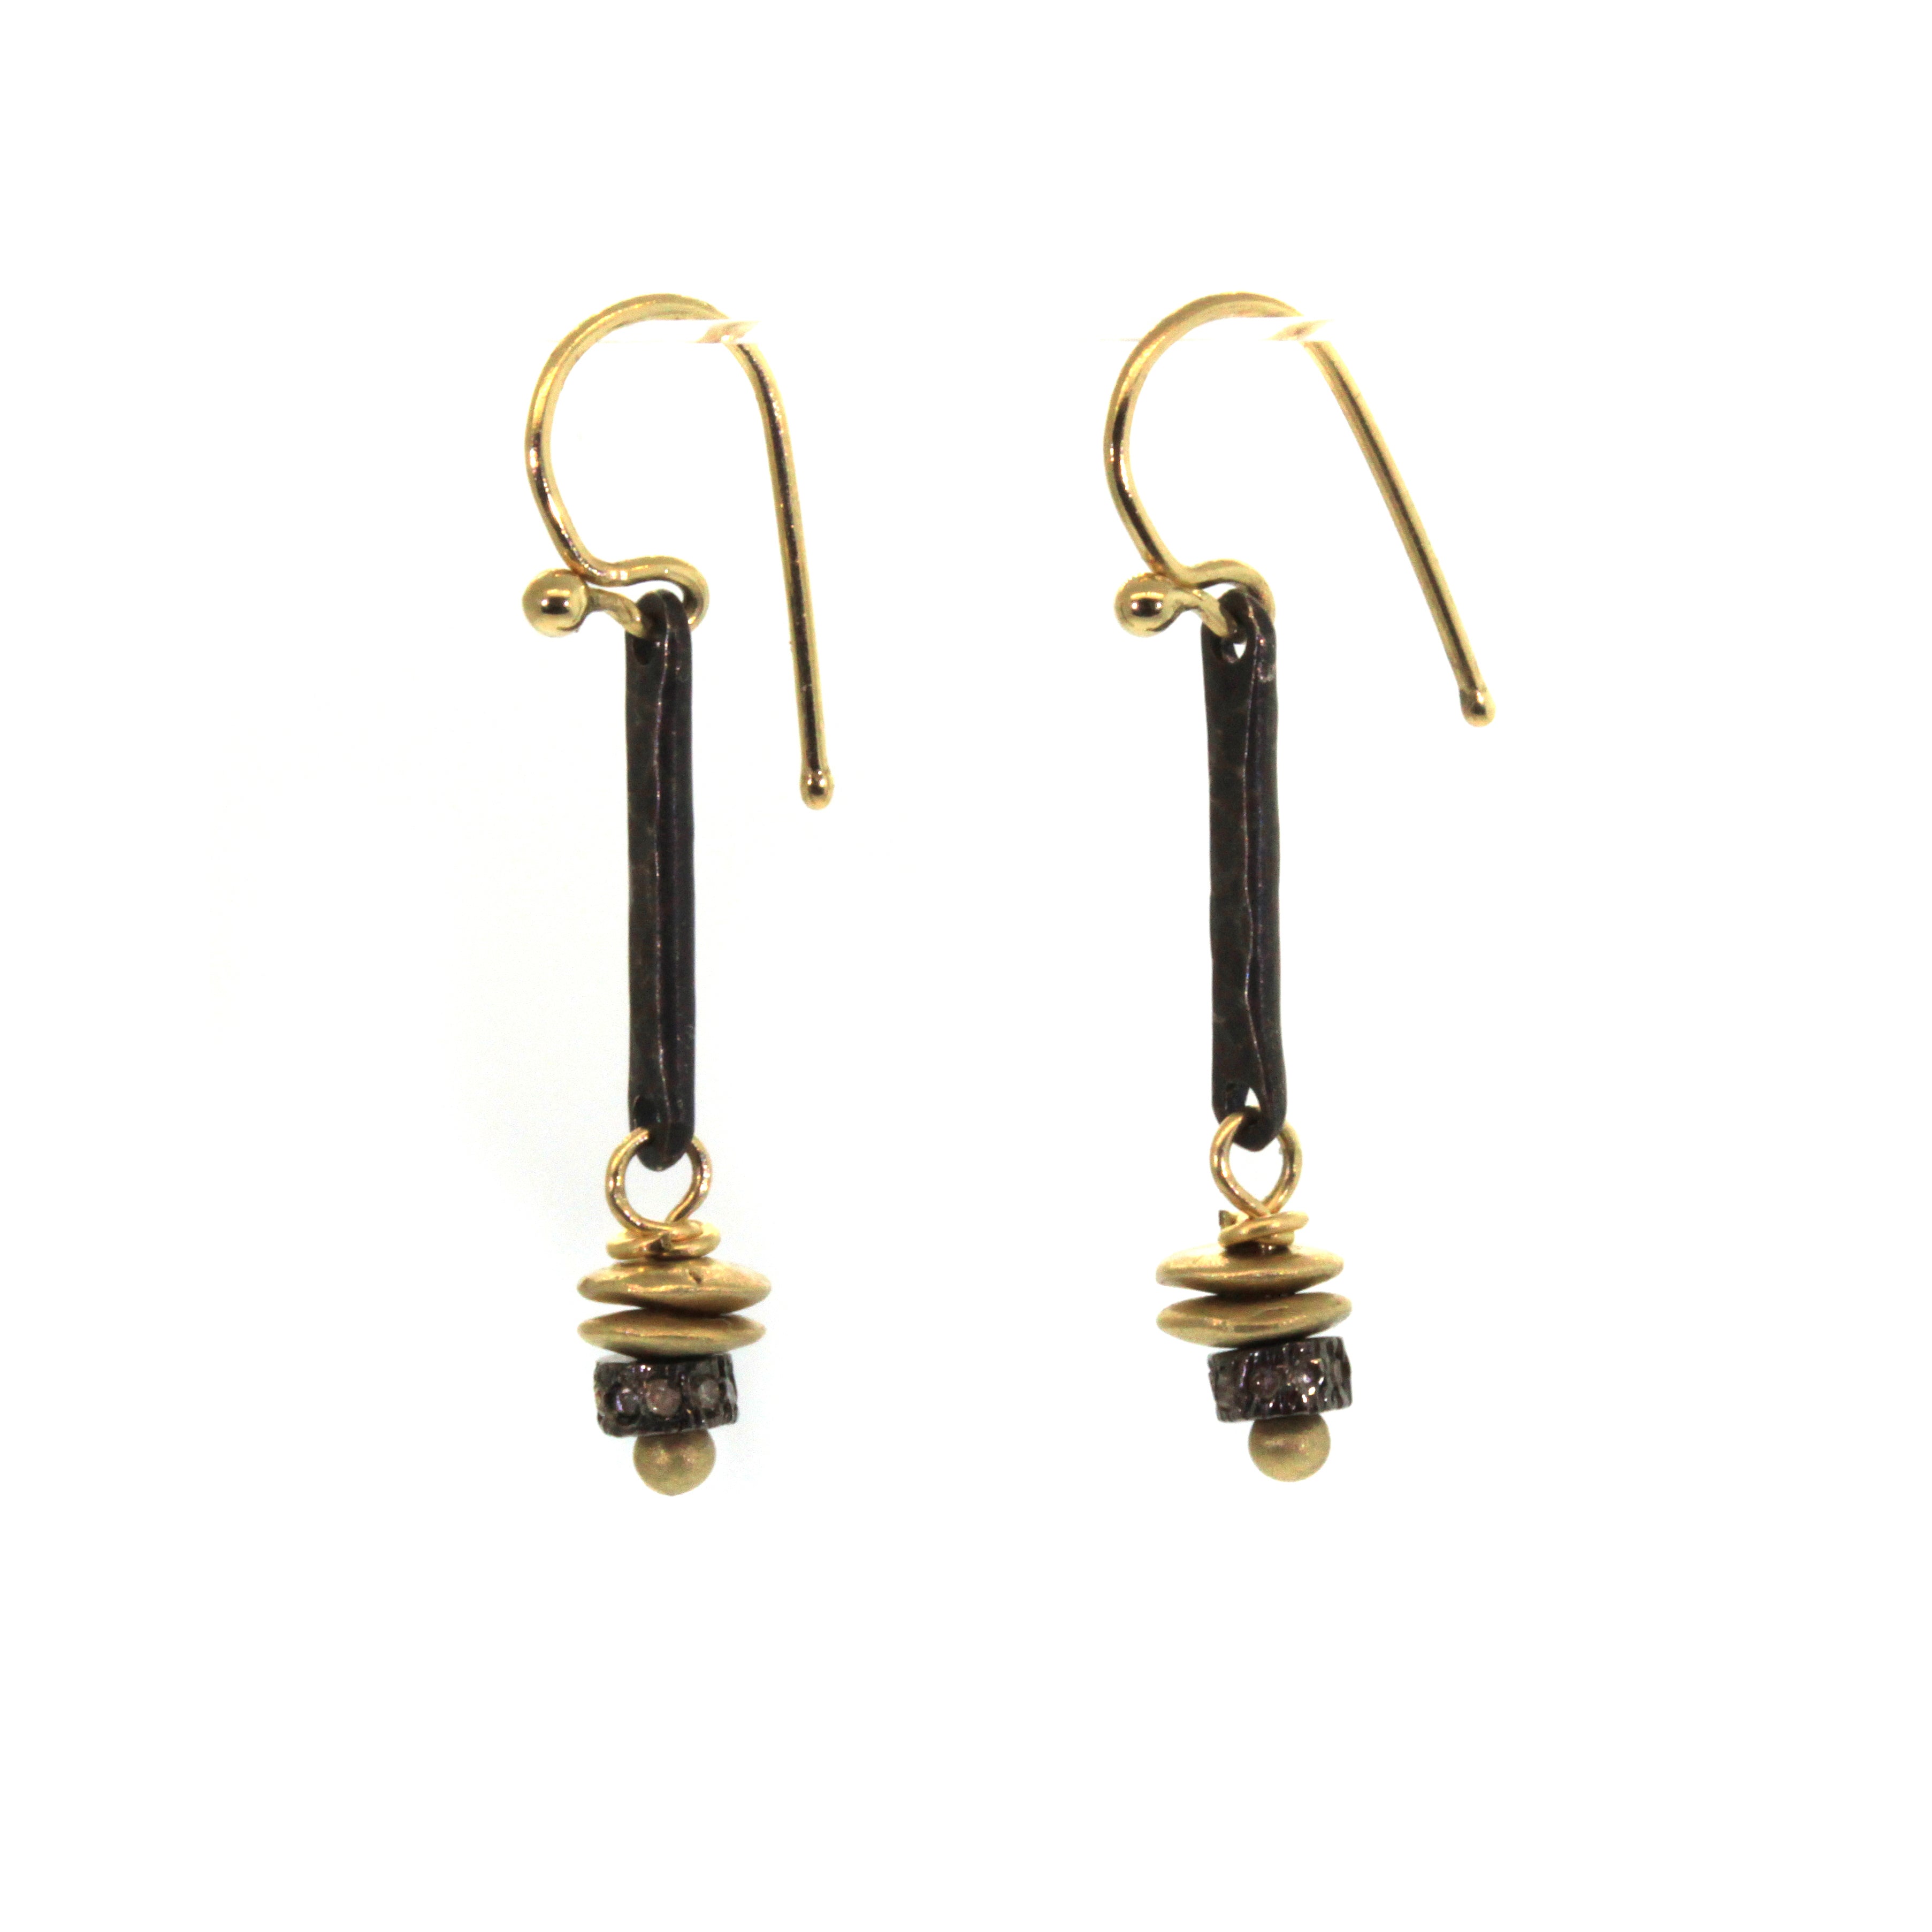 These Bohemian Dangle Earrings are handcrafted at Studio 703 + RLD by Rebecca Lankford. They feature an oxidized sterling silver bar with 2 yellow gold discs and a diamond roundel bead dangling from it. 